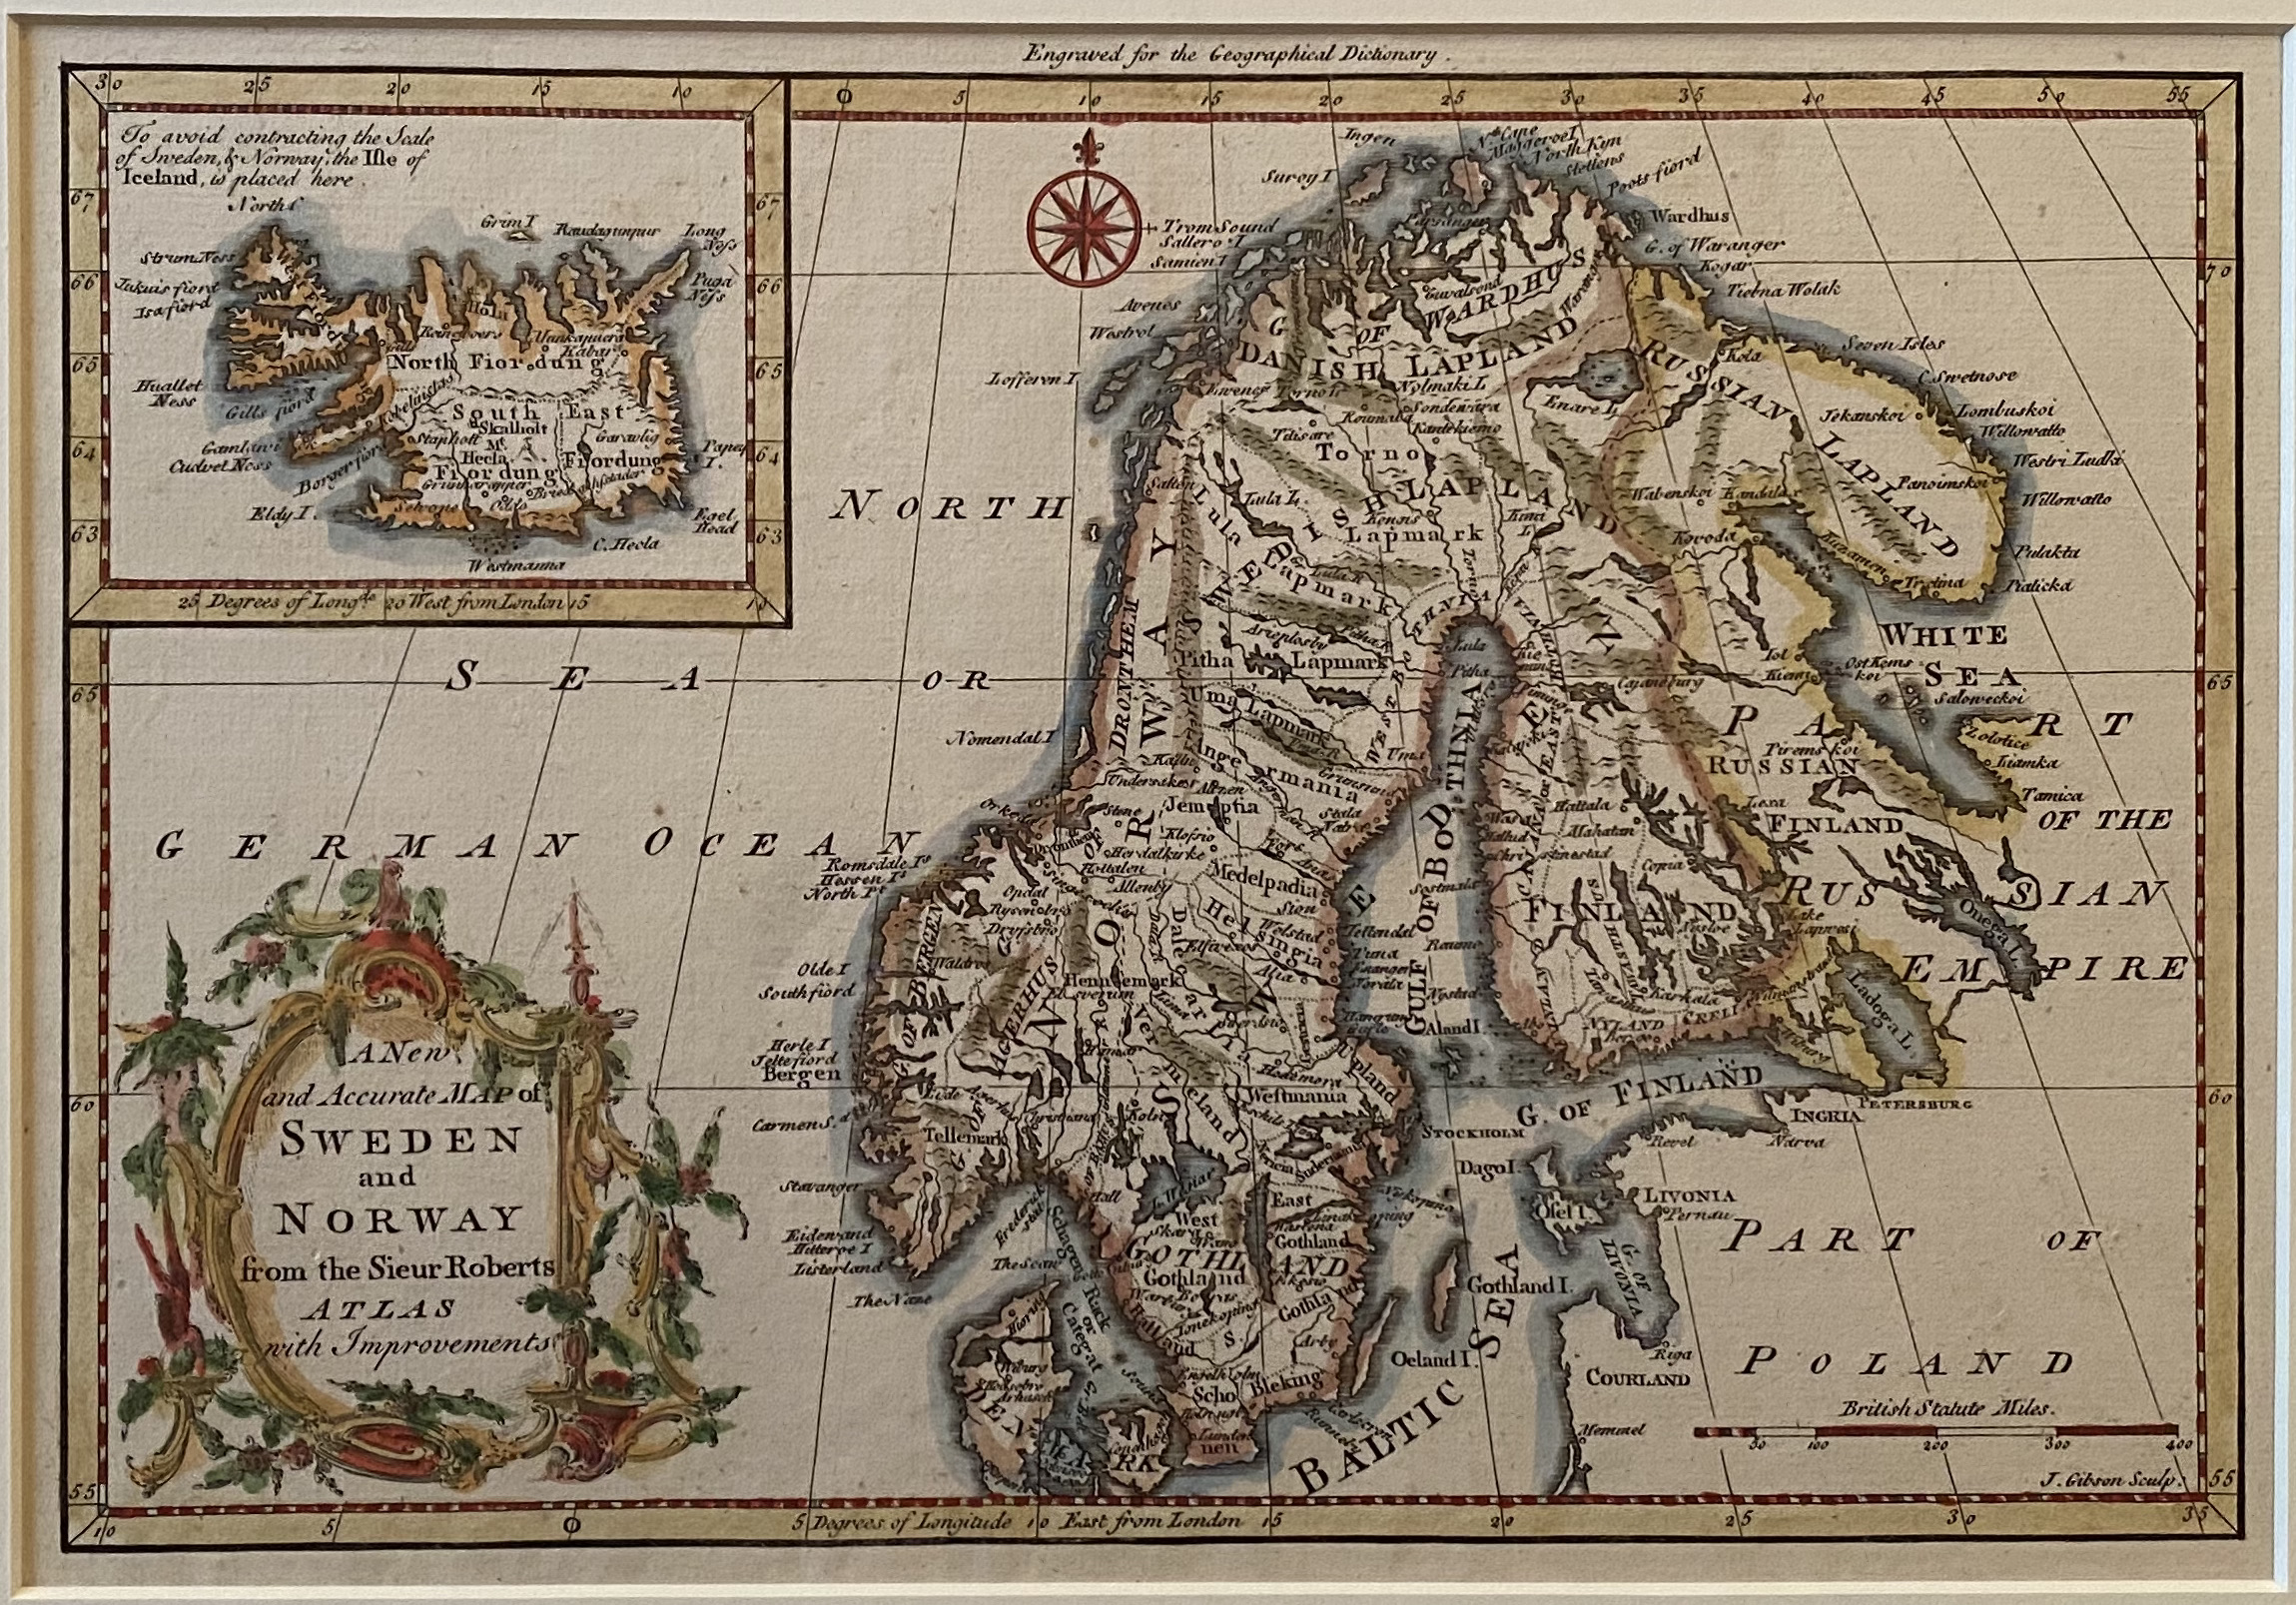 A New and Accurate Map of Sweden and Norway from the Sieur Roberts Atlas with Improvements